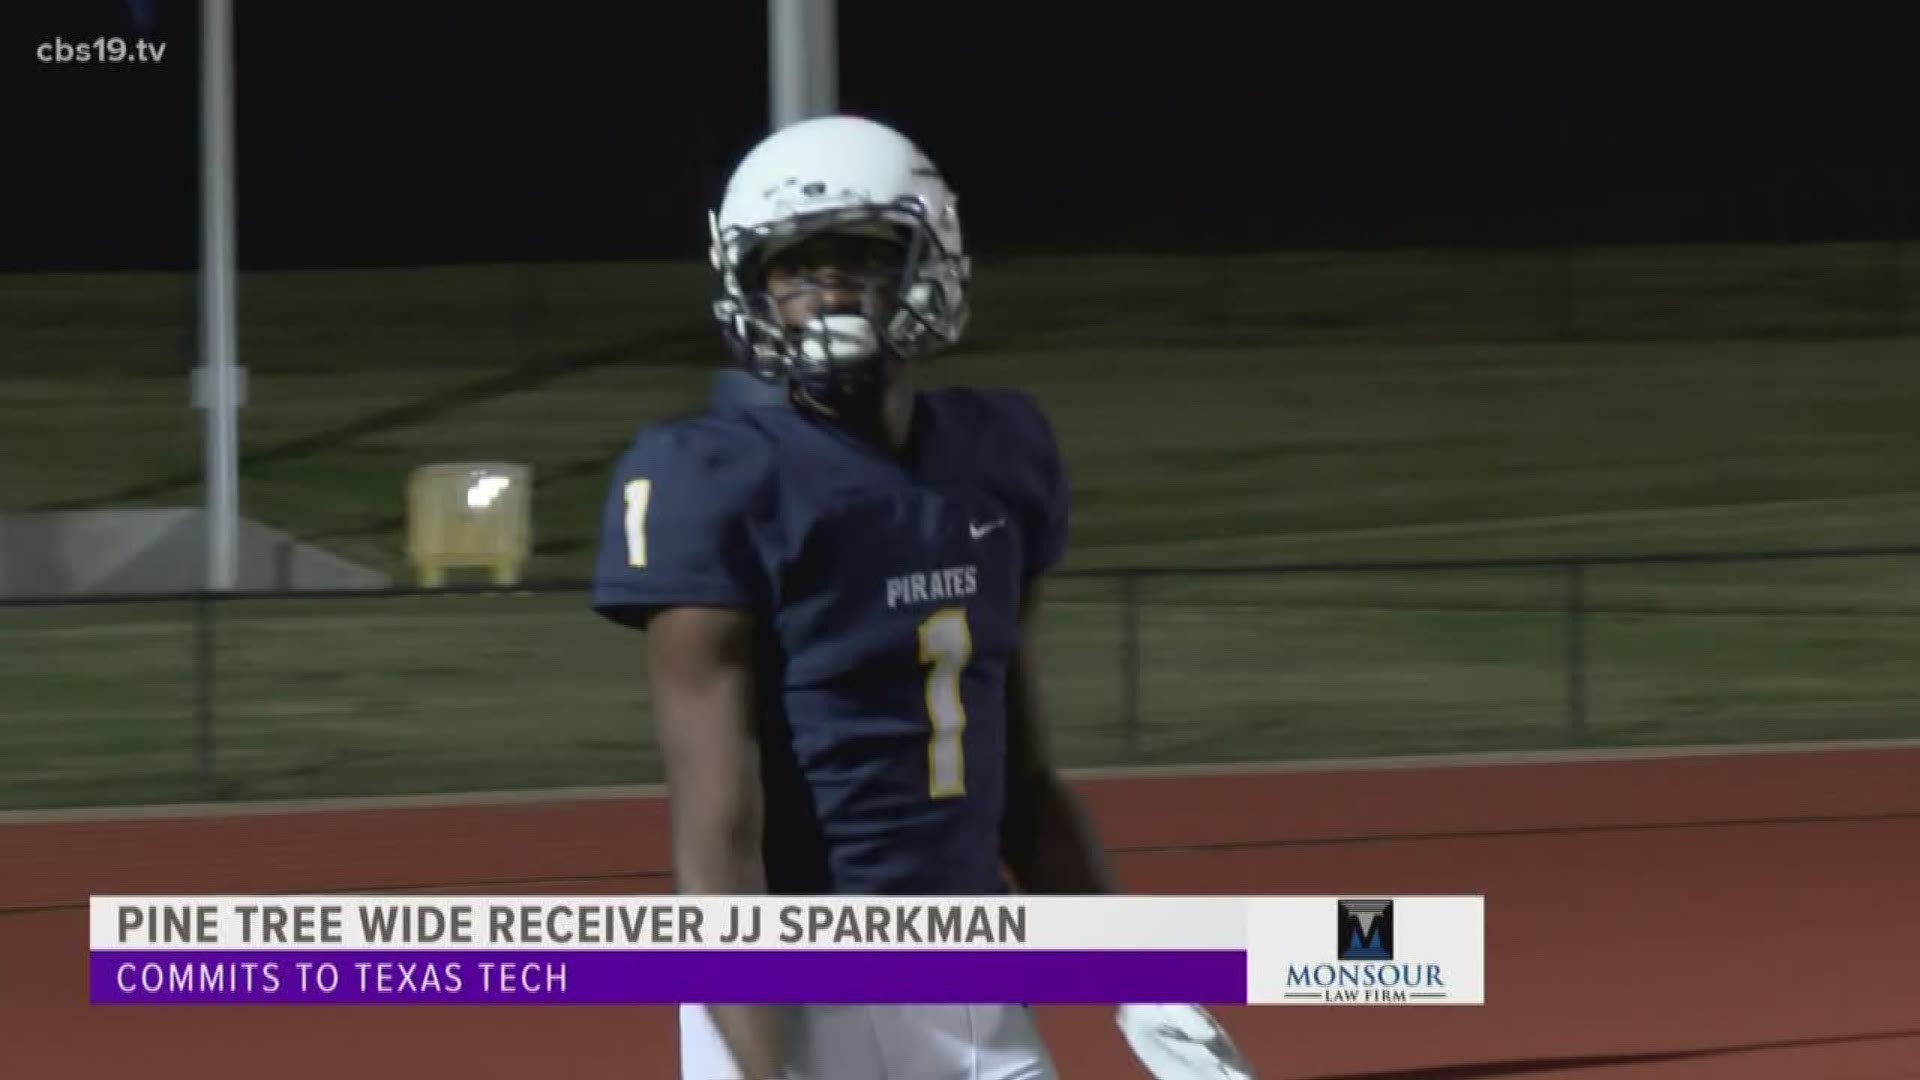 Pine Tree wide out JJ Sparkman is just the most recent East Texas product to choose to play his college ball in Lubbock. Sparkman follows in the footsteps of Patrick Mahomes & Dylan Cantrell as an East Texas super star that has elected to join the Red Raiders.